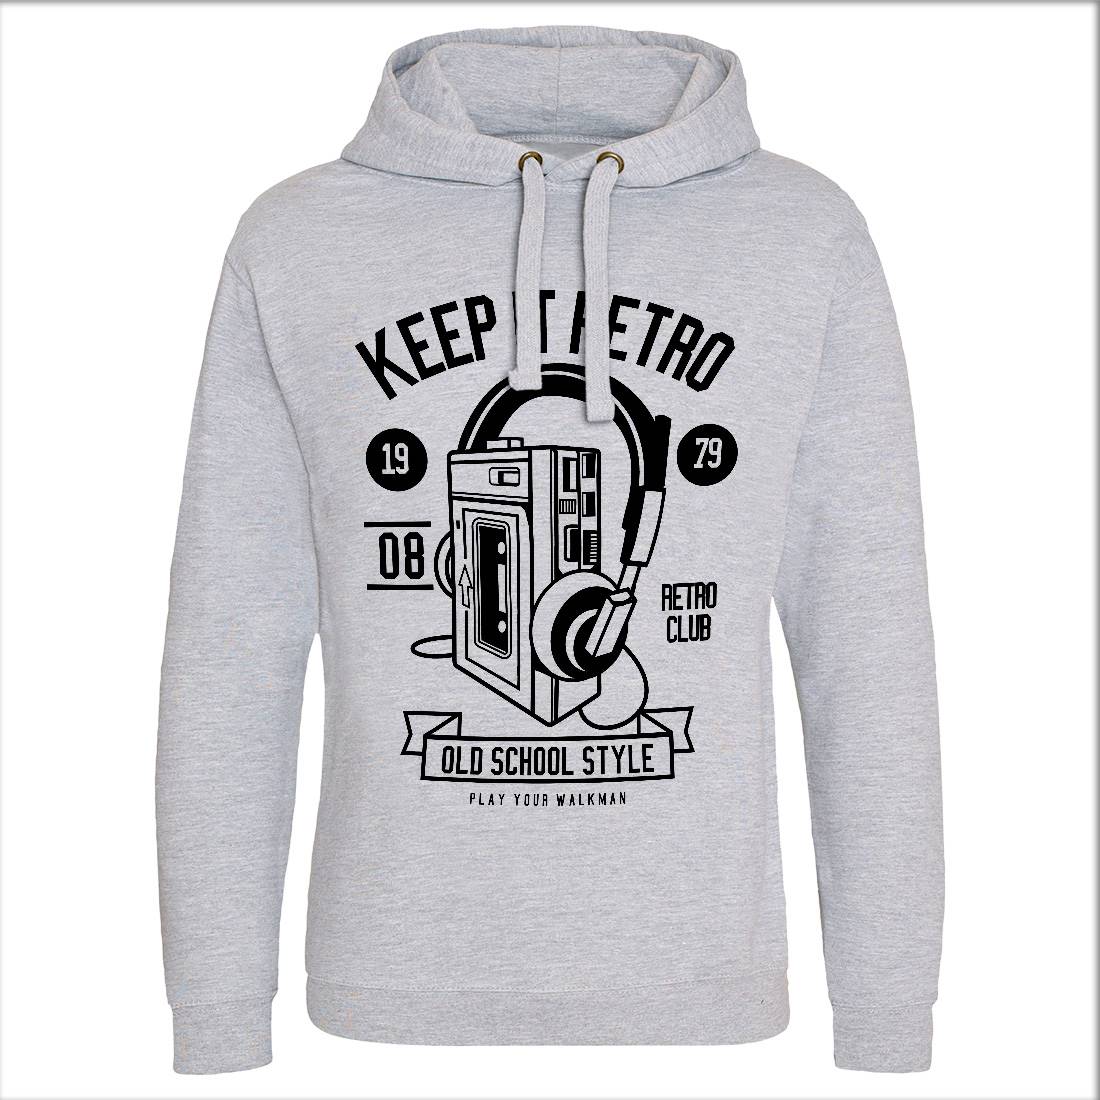 Keep It Retro Mens Hoodie Without Pocket Music B569